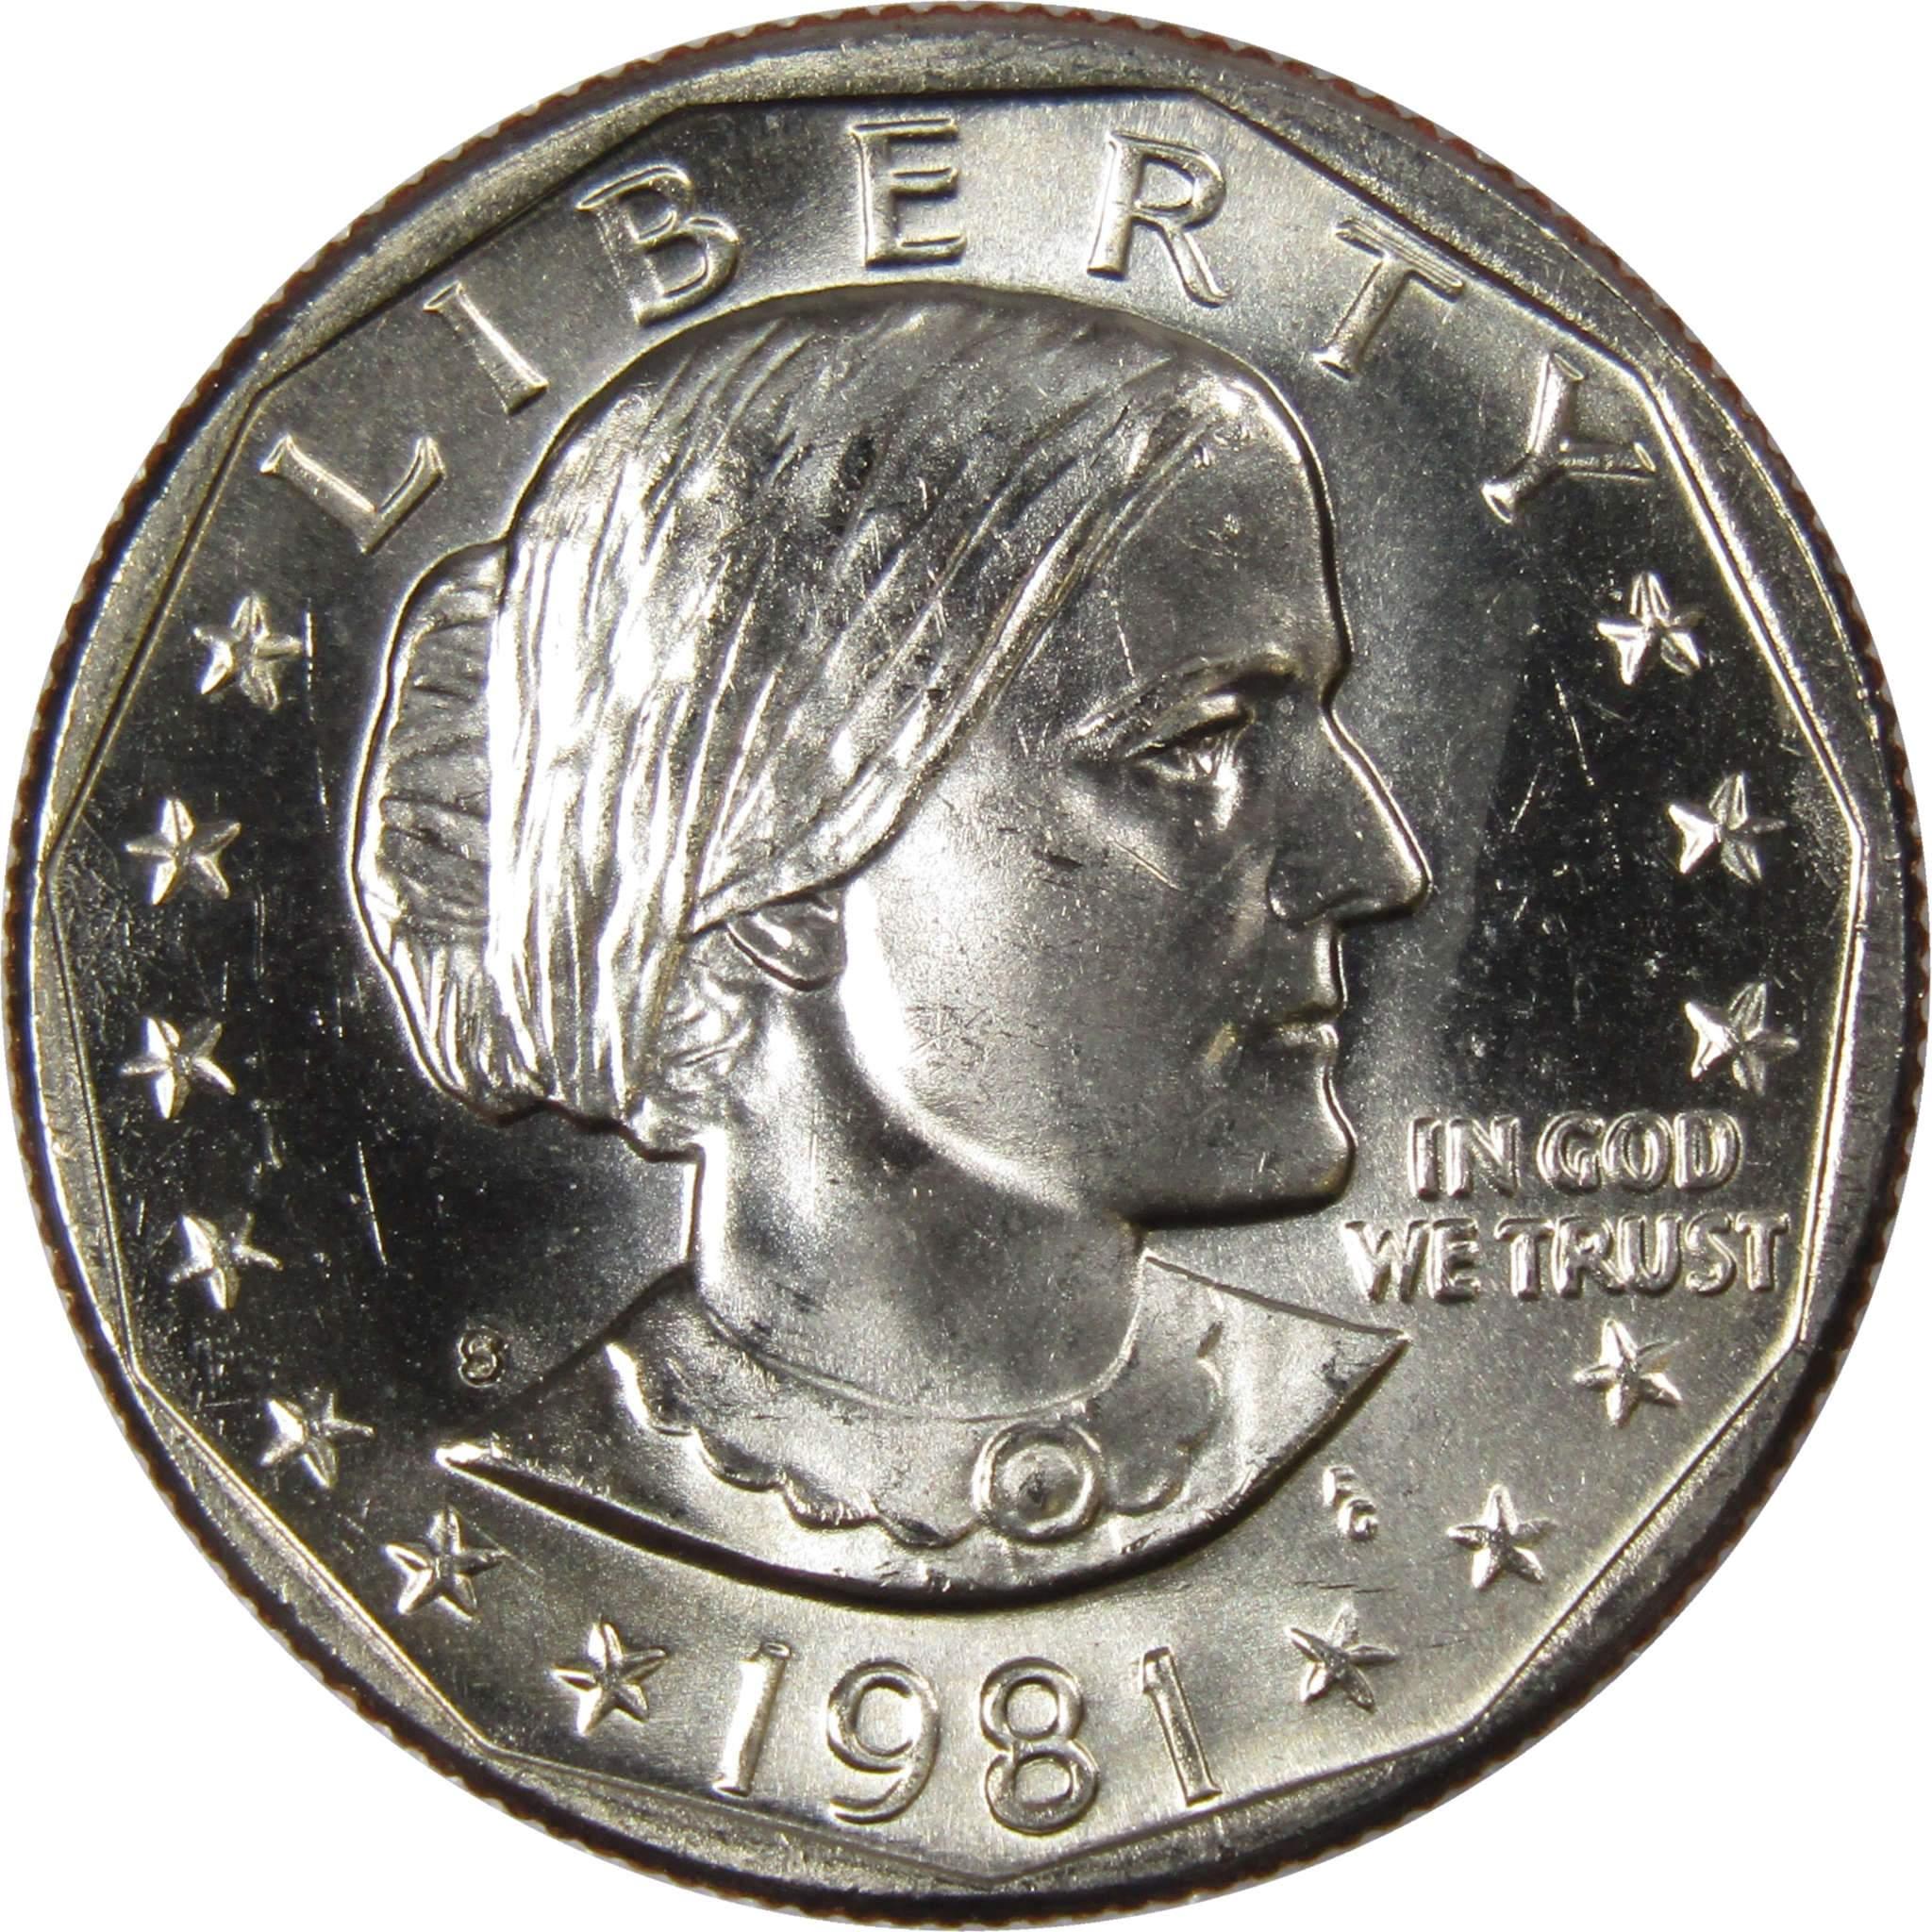 1981 S Susan B Anthony Dollar BU Uncirculated Mint State SBA $1 US Coin